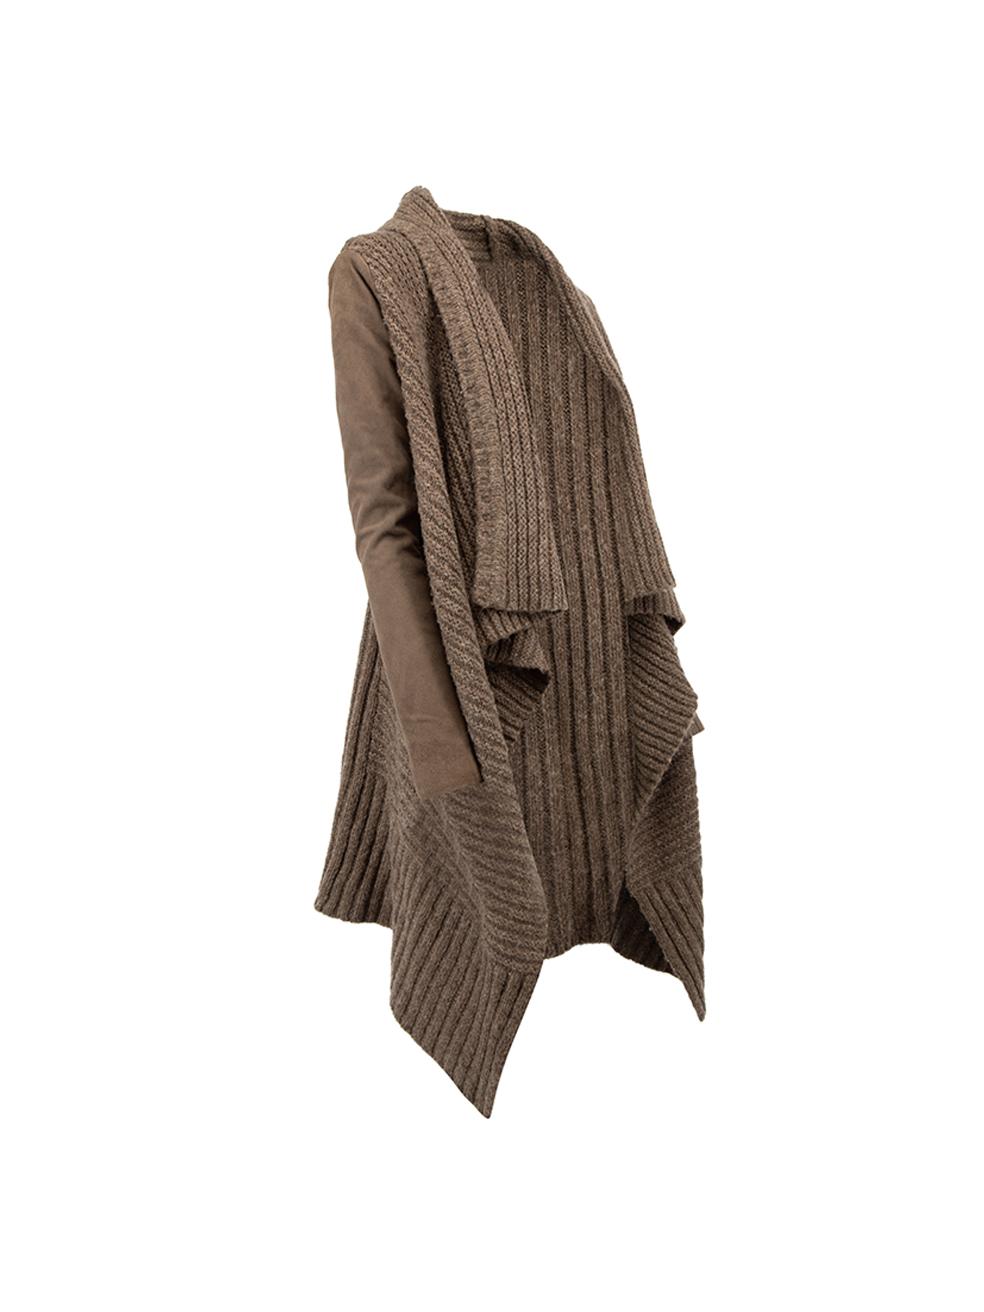 CONDITION is Very good. Hardly any visible wear to cardigan is evident on this used All Saints designer resale item. 



Details


Brown

Wool

Mid length knit cardigan

Drape hemline

Suede panel sleeves

Open front





Made in